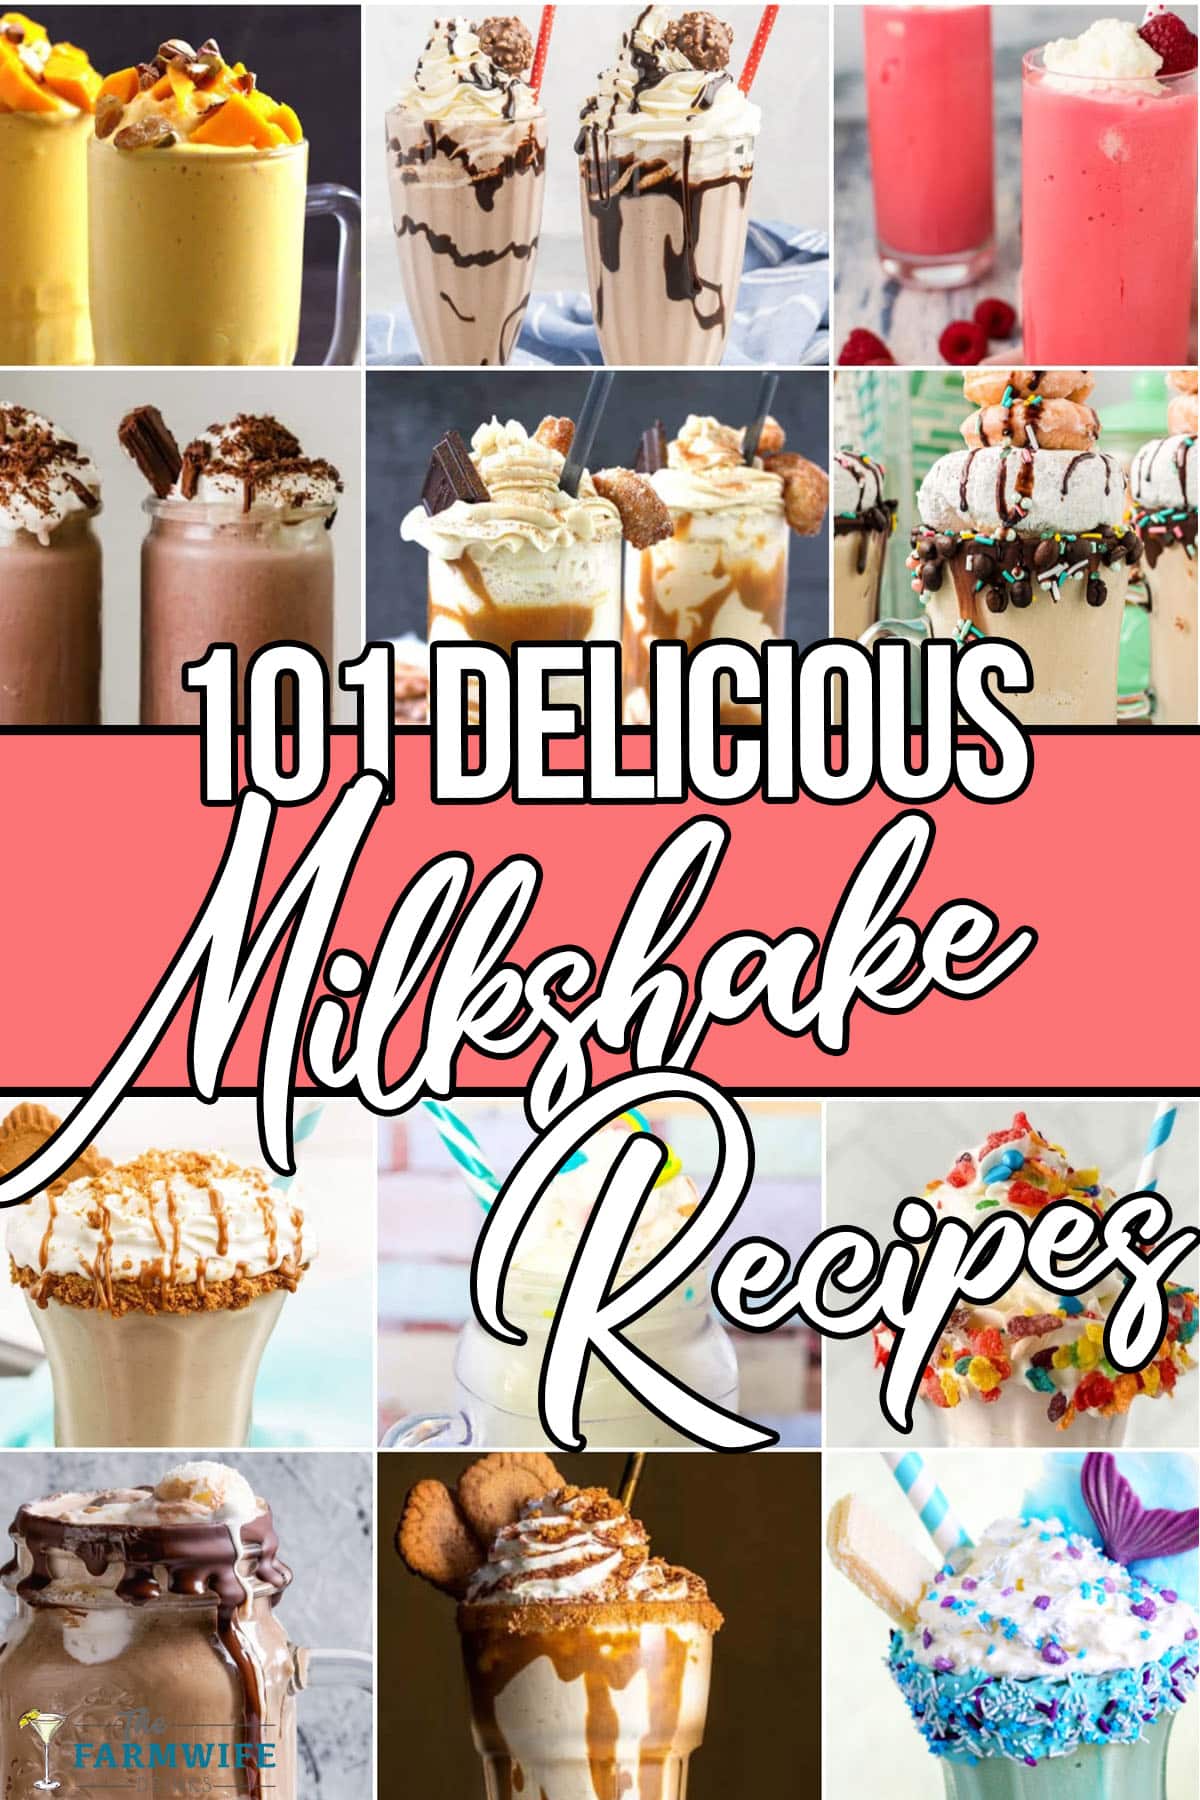 photo collage of unique milkshake recipes with text which reads 101 delicious milkshake recipes